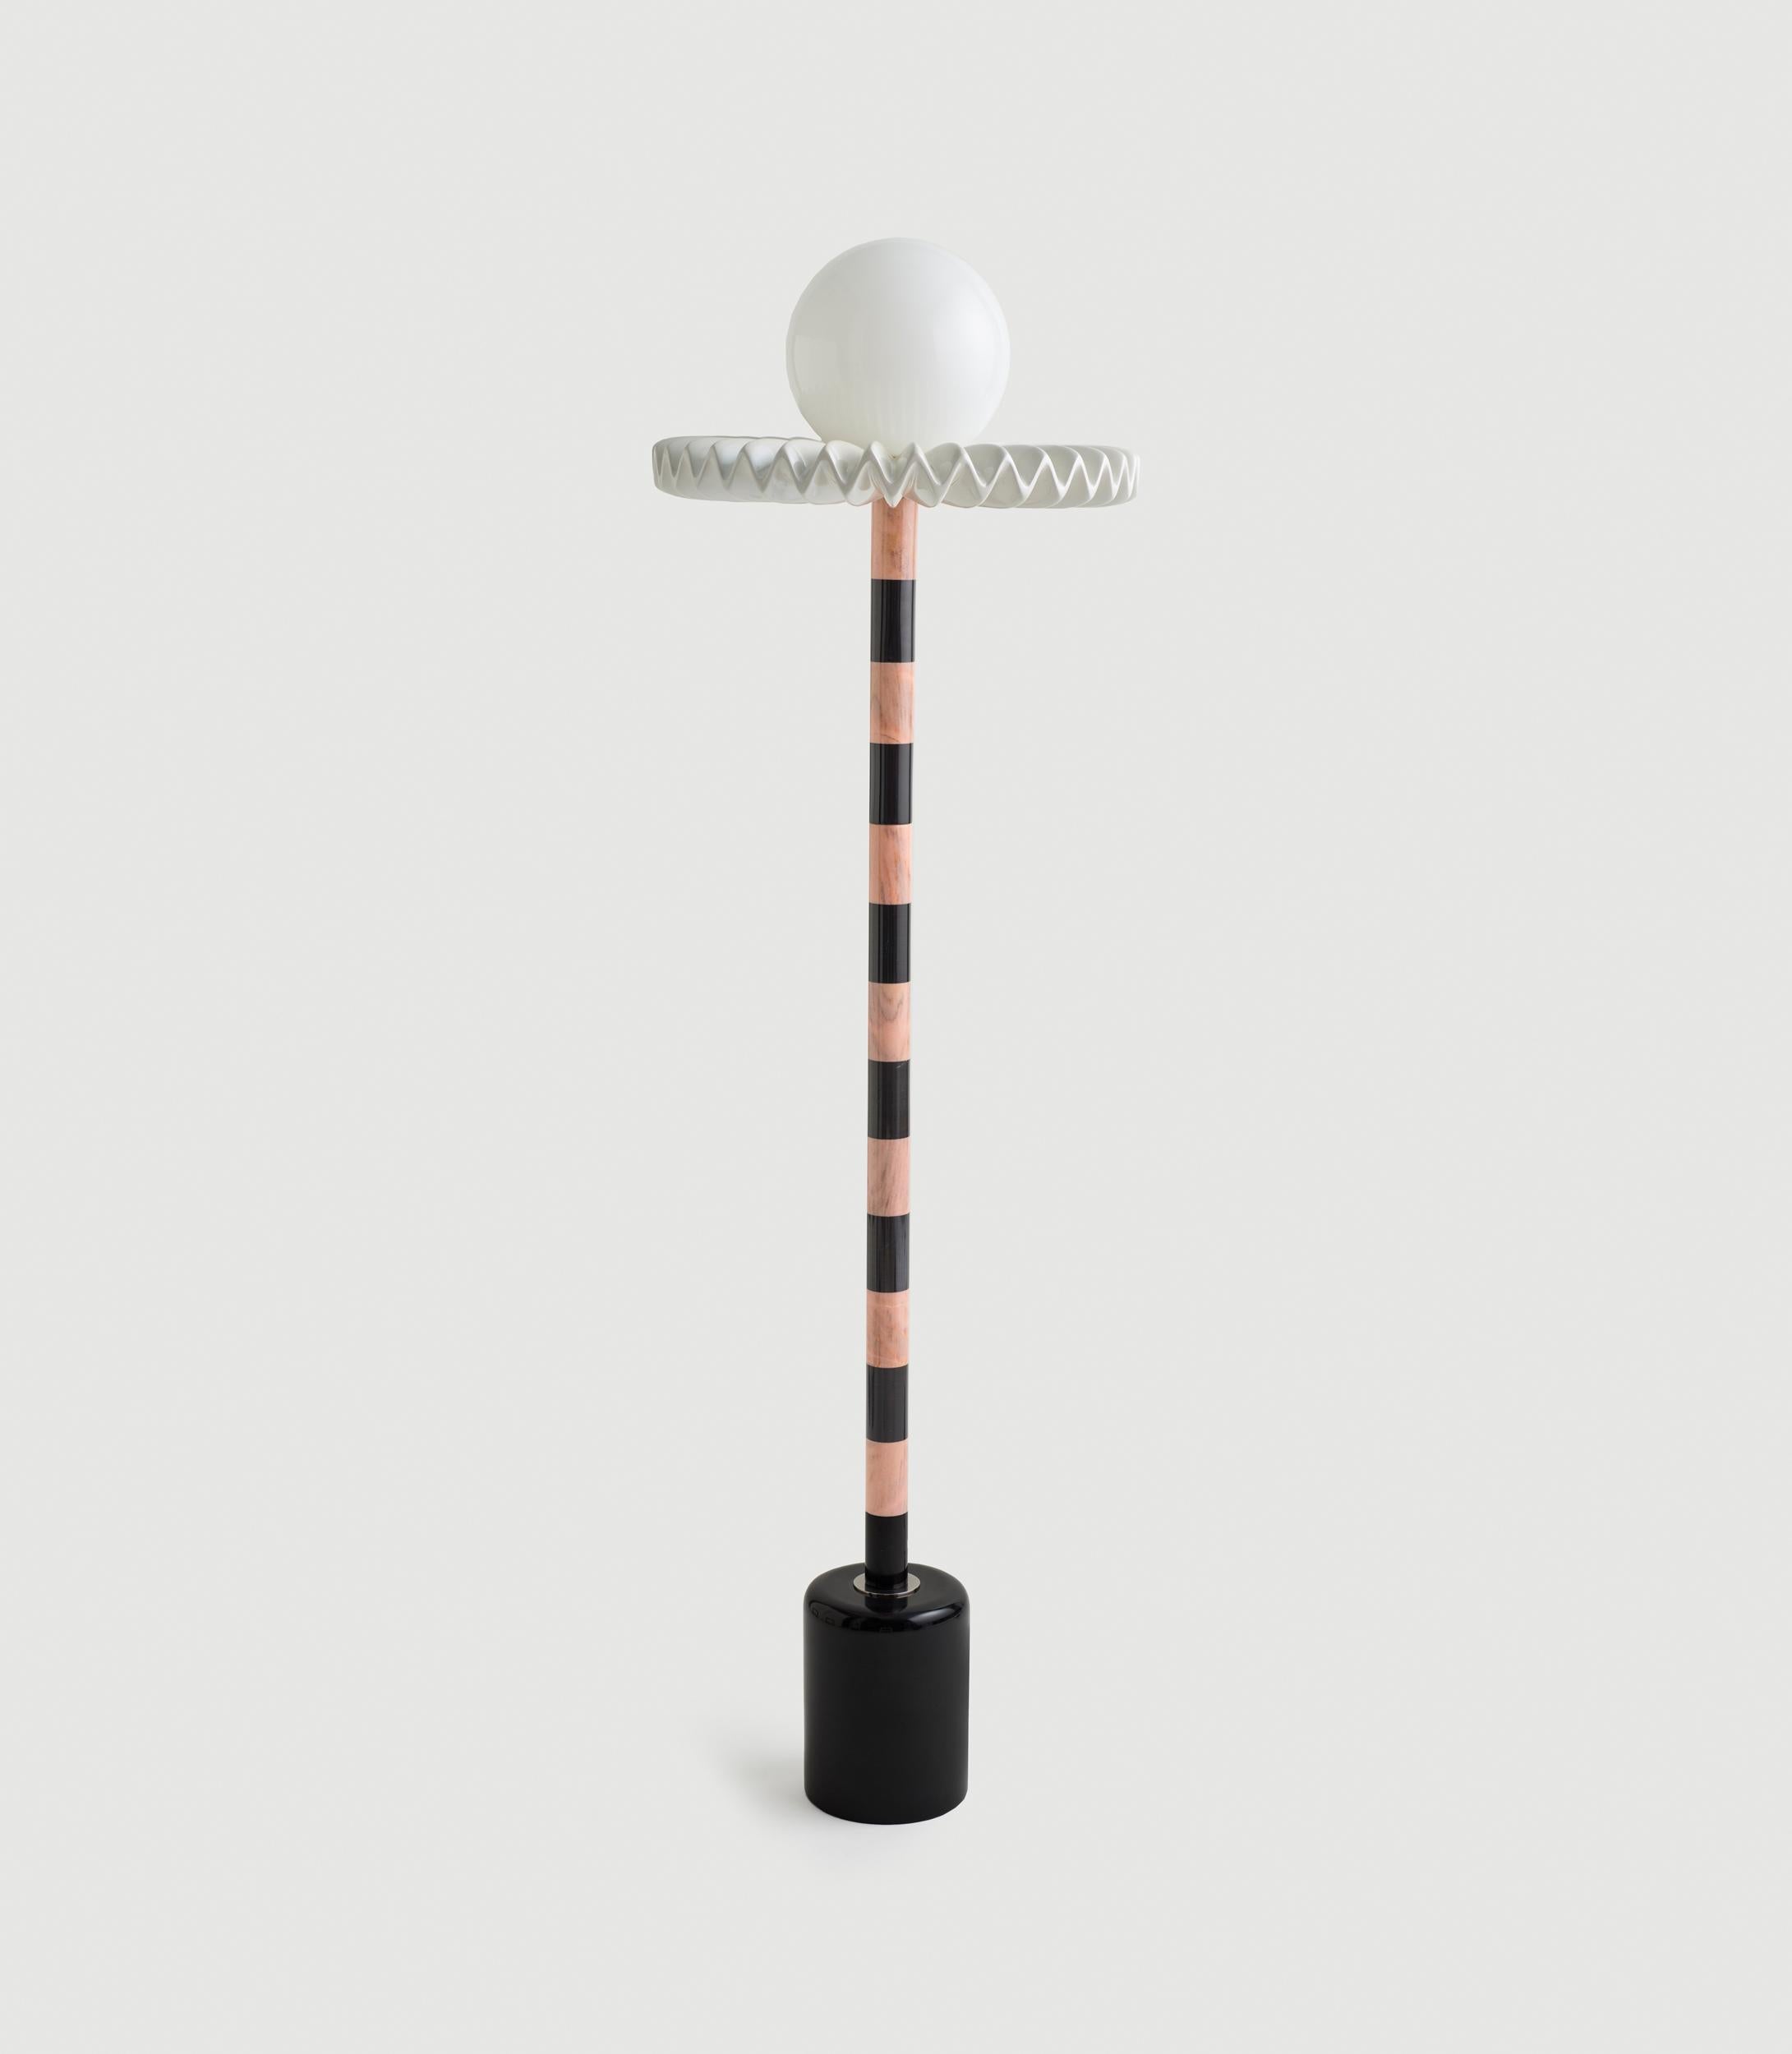 “Sare” is a floor lamp inspired by the 17th century ruff collar which was a symbol of wealth and status. It also resembles the silent clown “Pierrot” with it’s striped marble body and round glass head. Sare is handcrafted and assembled with